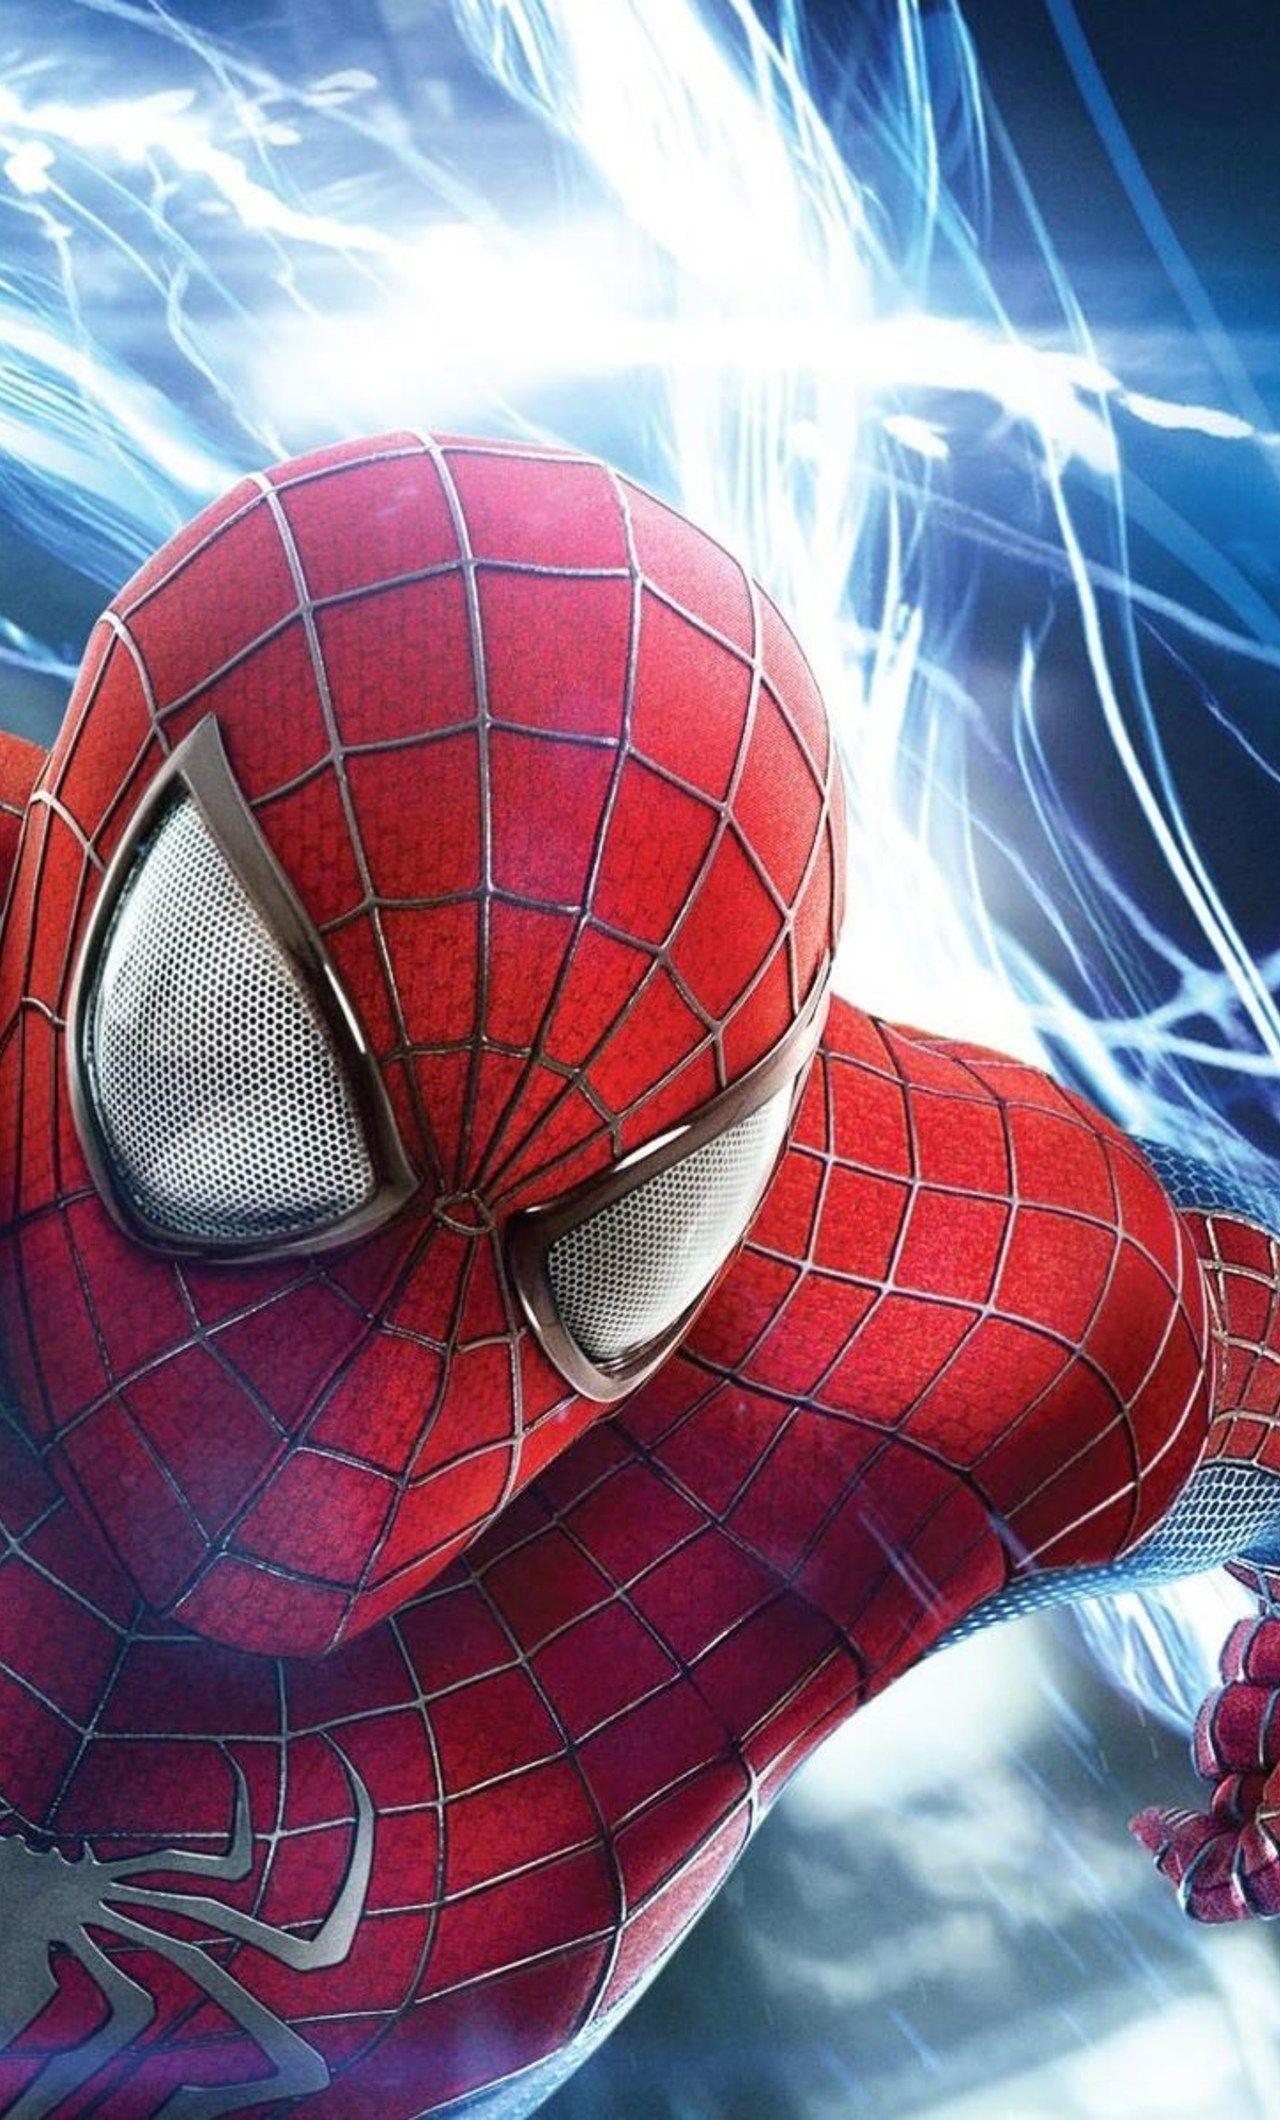 download the last version for iphoneSpider-Man